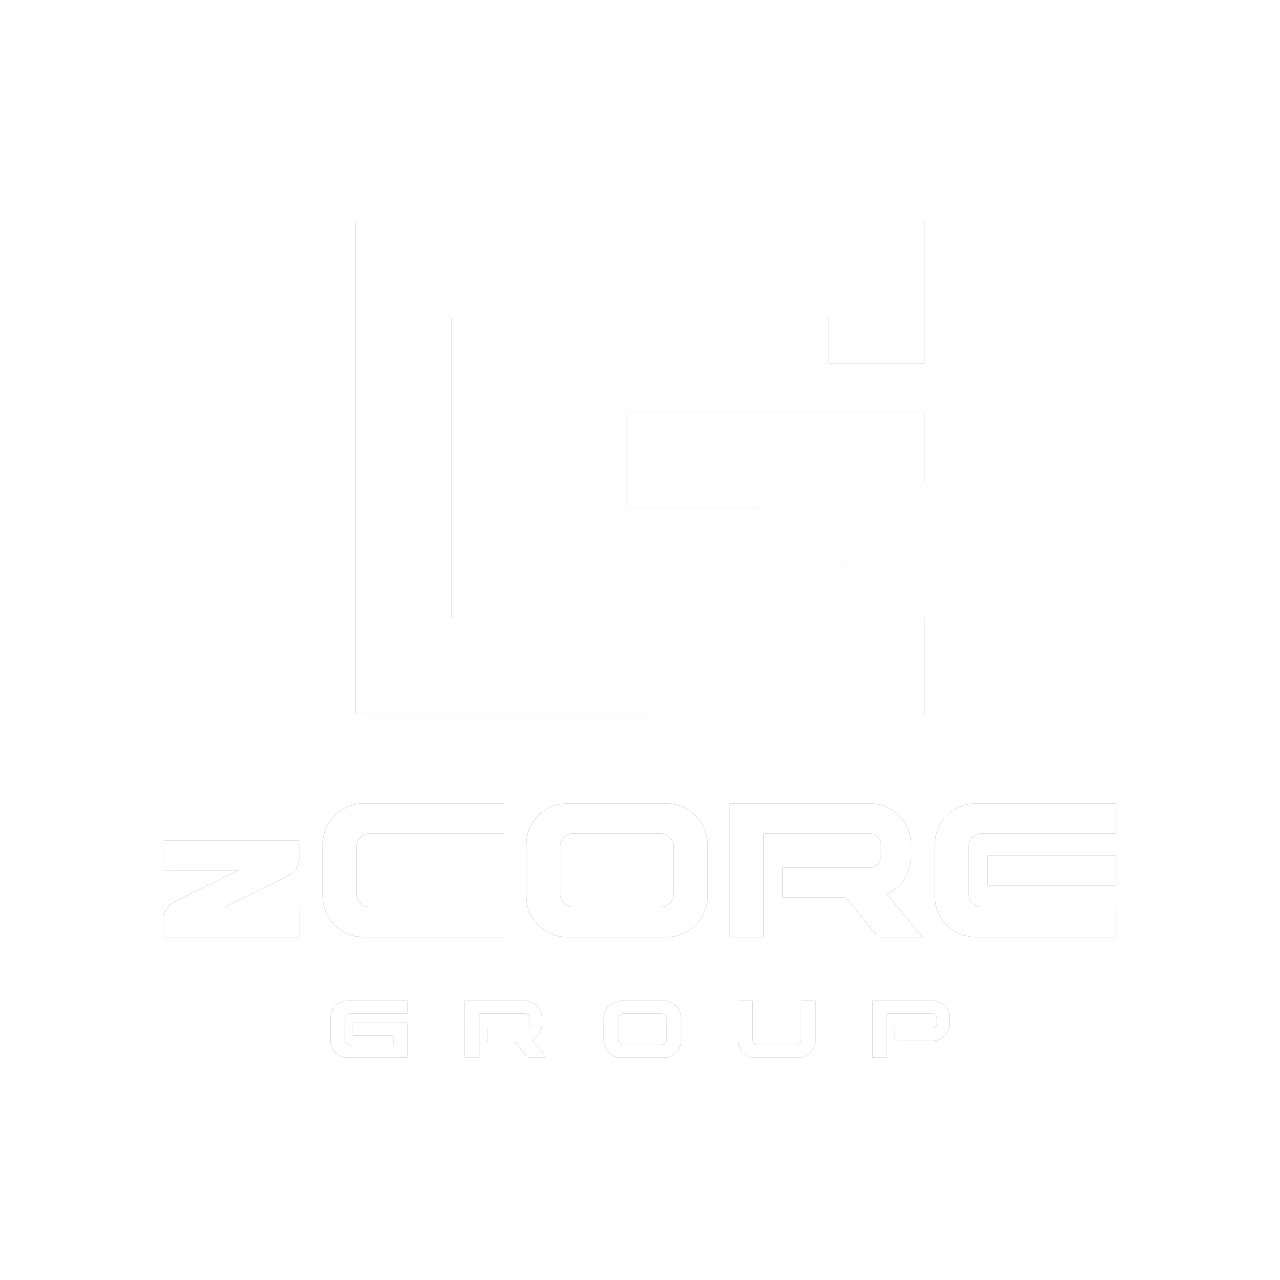 zCoreGroup - Bleeding Edge Government Software Contracting